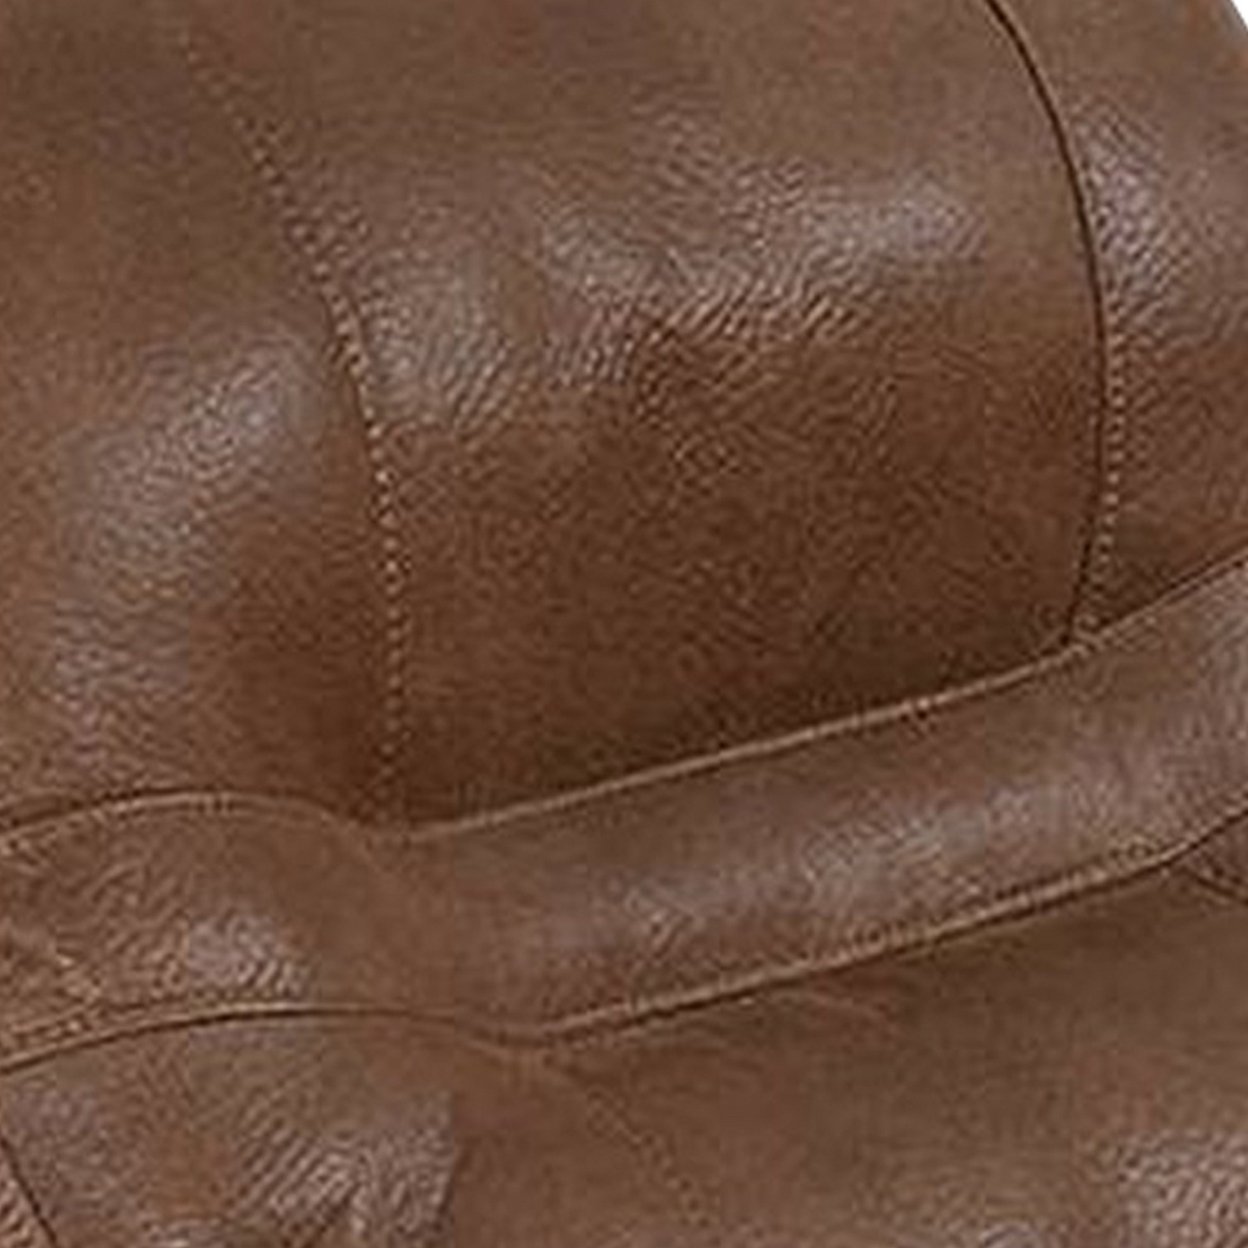 41 Inch Leatherette Reclining Chair With USB Port, Brown- Saltoro Sherpi